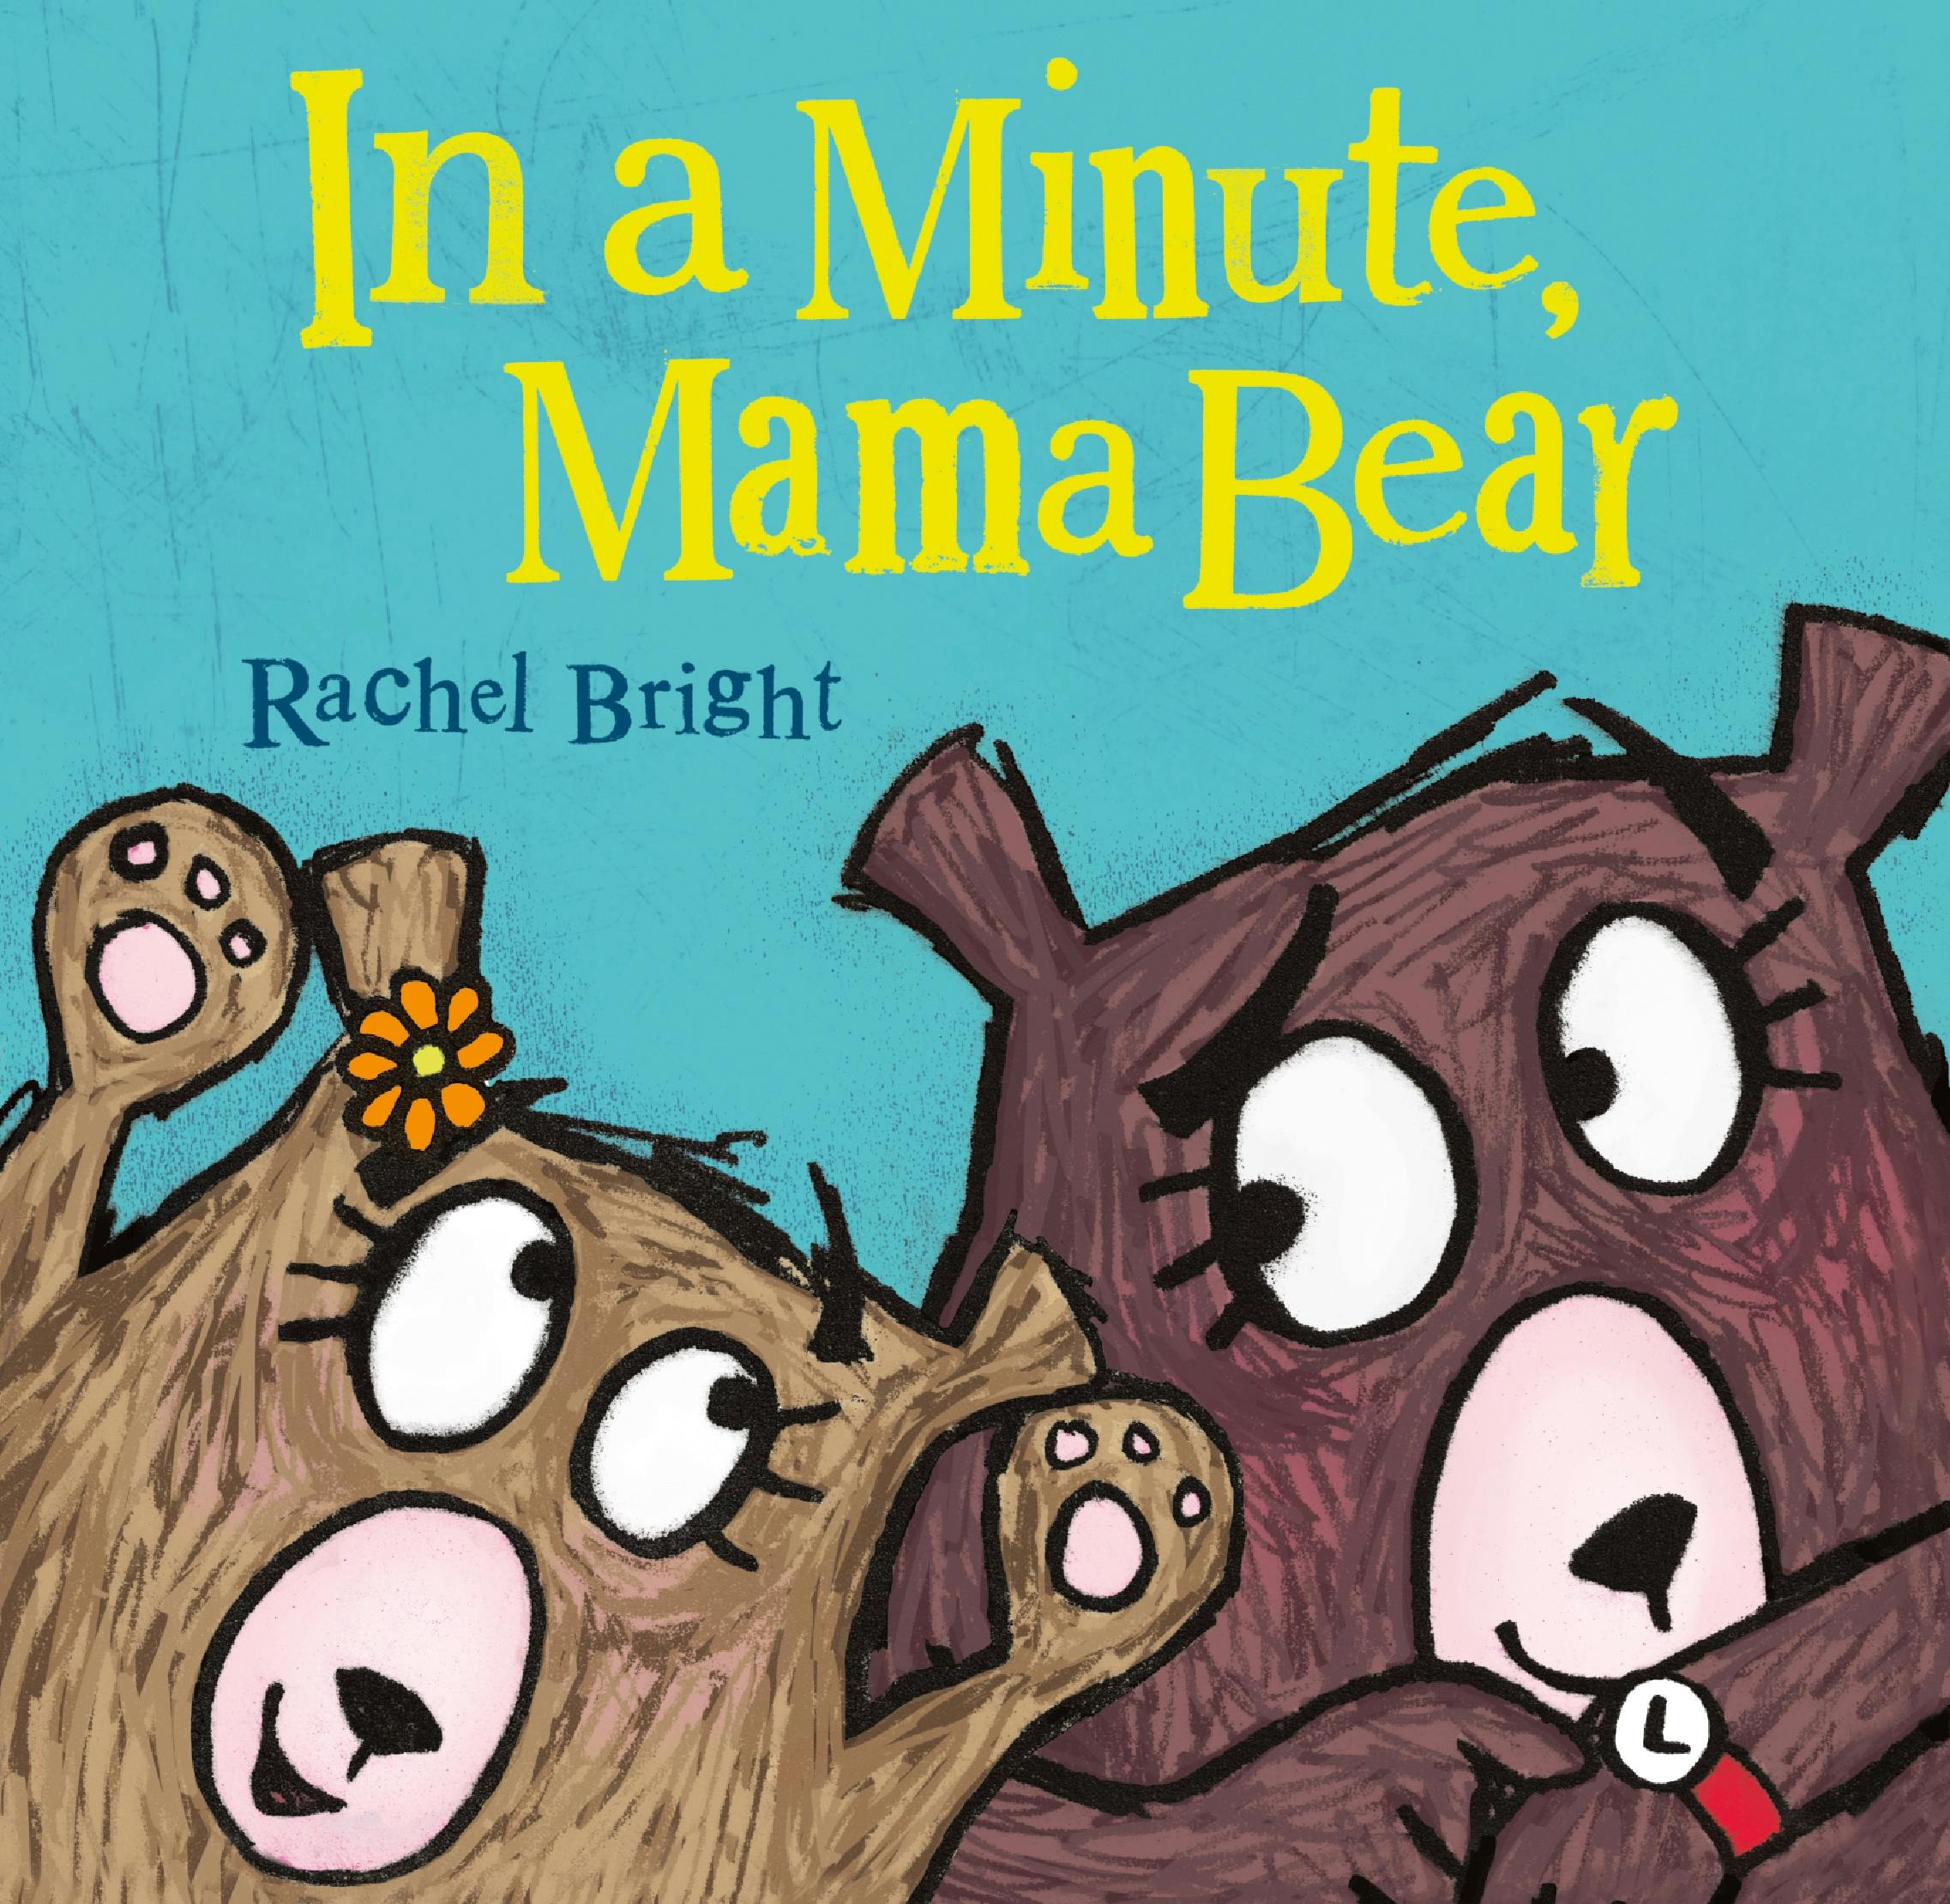 Image of In a Minute, Mama Bear